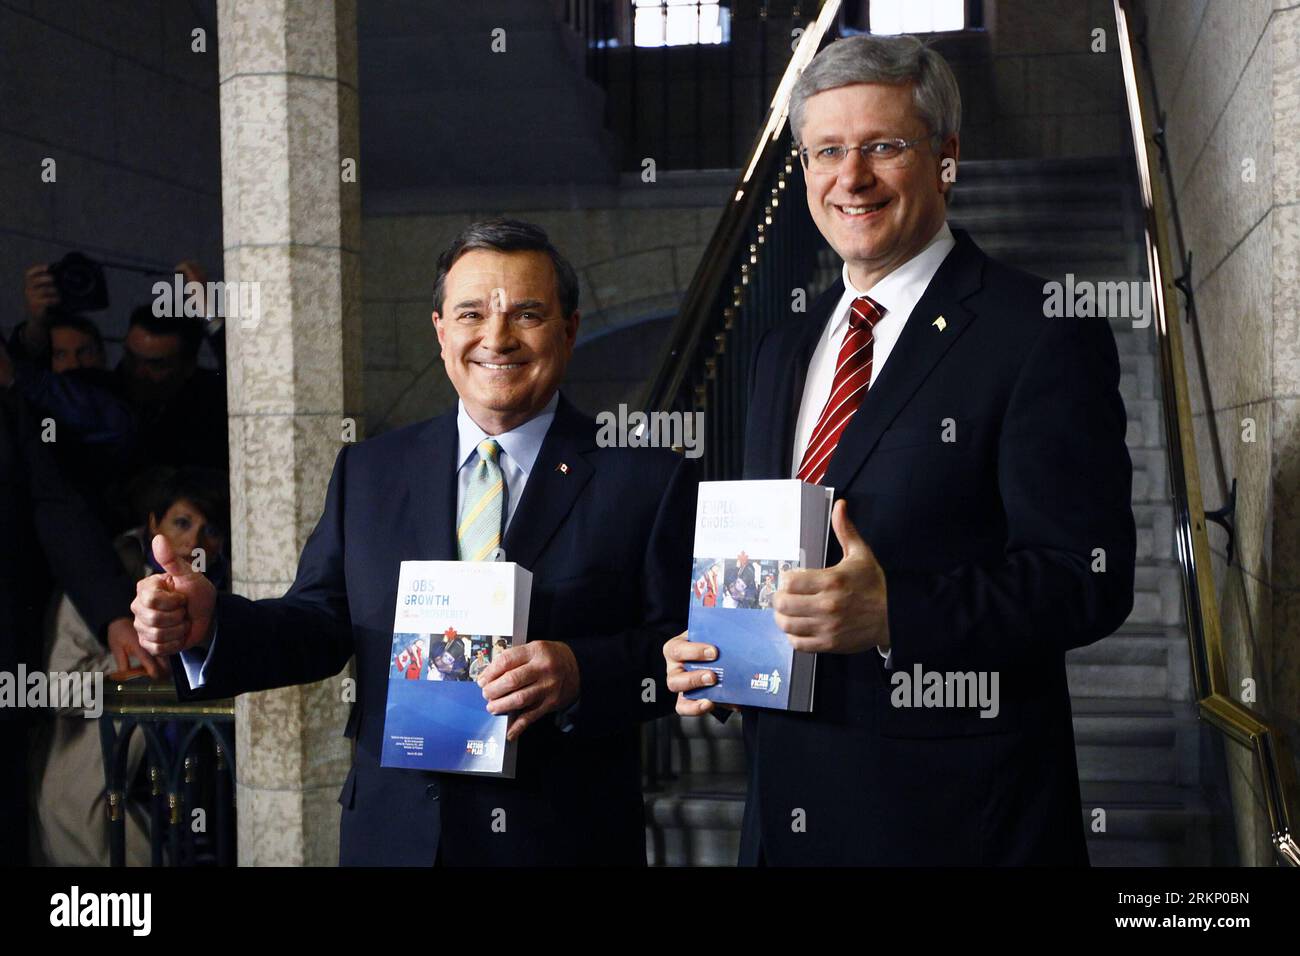 Bildnummer: 57750960  Datum: 29.03.2012  Copyright: imago/Xinhua (120330) -- OTTAWA, March 30, 2012 (Xinhua) -- Canada s Prime Minister Stephen Harper (R) and Finance Minister Jim Flaherty hold copies of the budget as they walk to the House of Commons to deliver the budget in Ottawa, March 29, 2012. The Canadian government announced a wide range of spending cuts and administrative streamlinings Thursday, promising to balance its budget by the 2015-2016 budget year. (Xinhua/David Kawai) (zyw) CANADA-OTTAWA-BUDGET-DELIVERY PUBLICATIONxNOTxINxCHN People Politik xdp x0x premiumd 2012 quer      577 Stock Photo